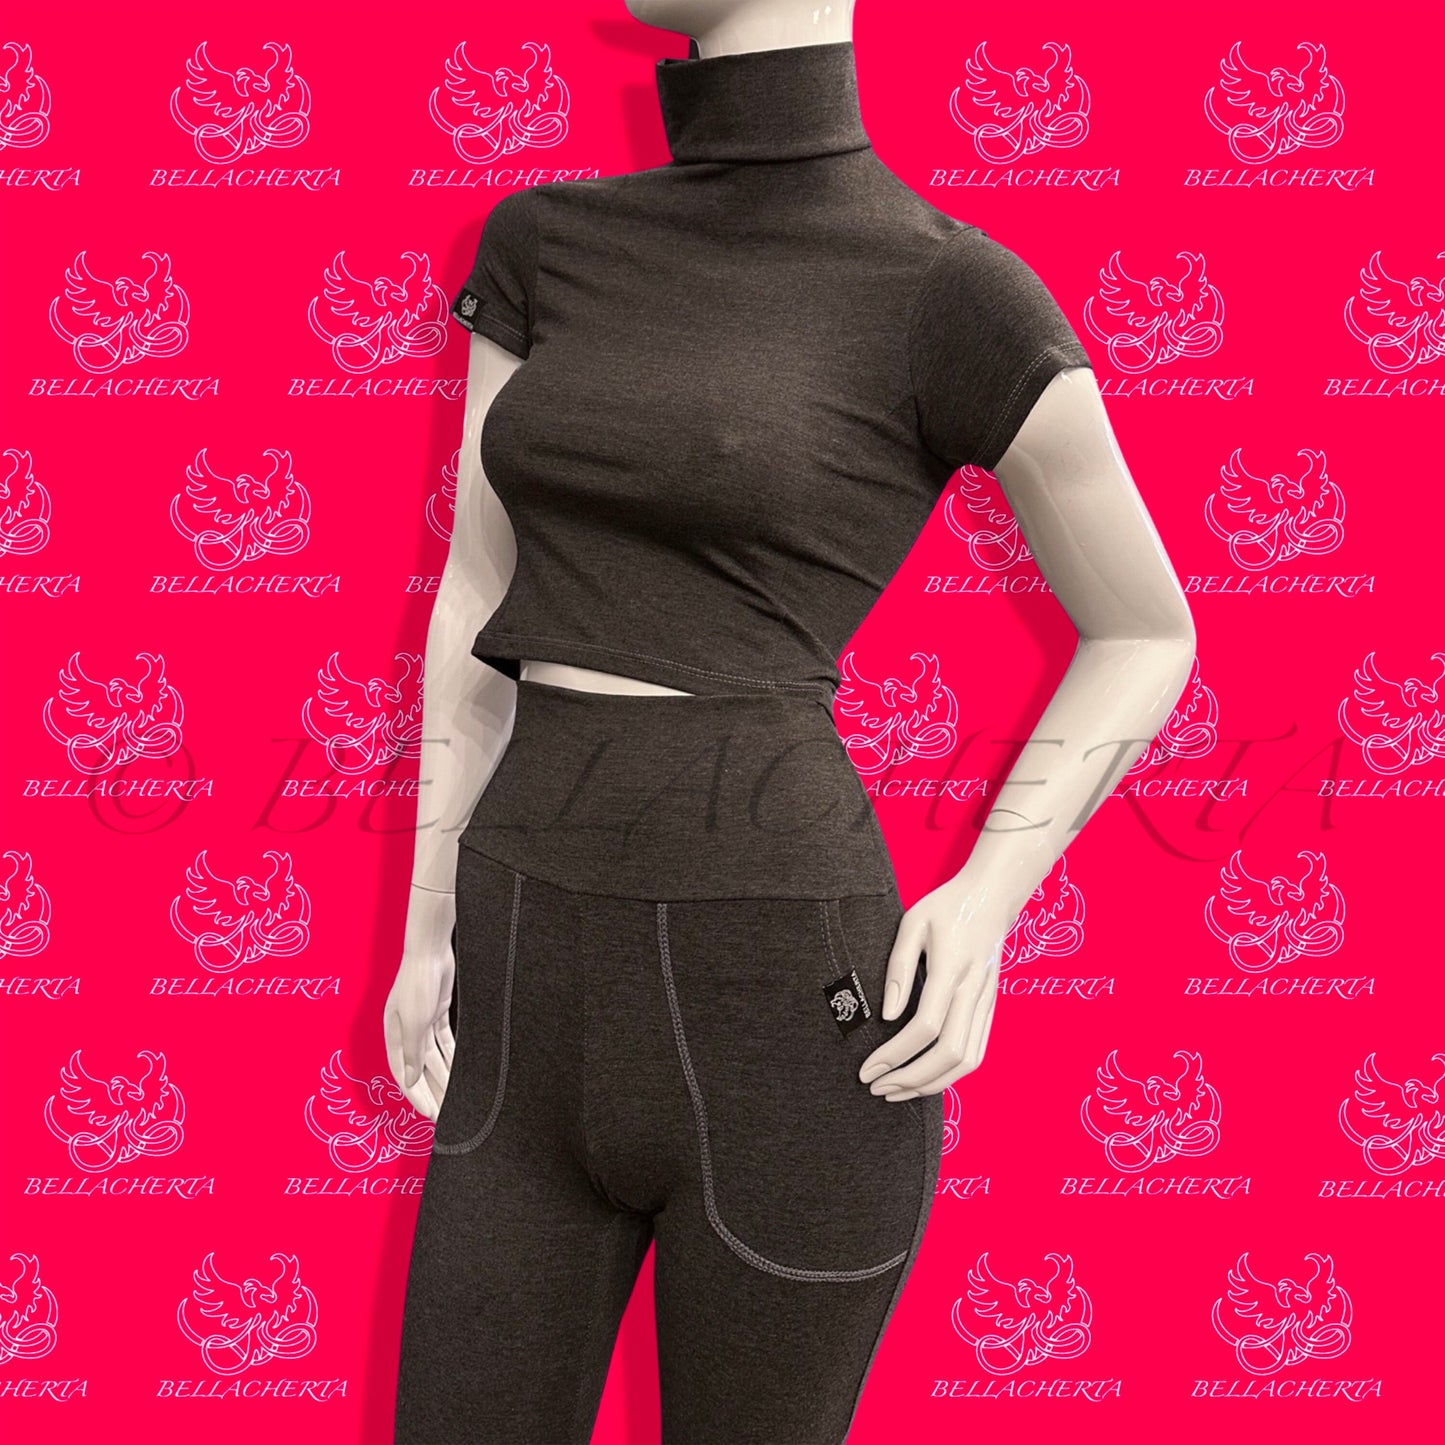 High-Waisted Pants and Short Sleeved Turtleneck Cropped Top Set, activewear, gymwear, yoga set, casual wear, trendy gym wear